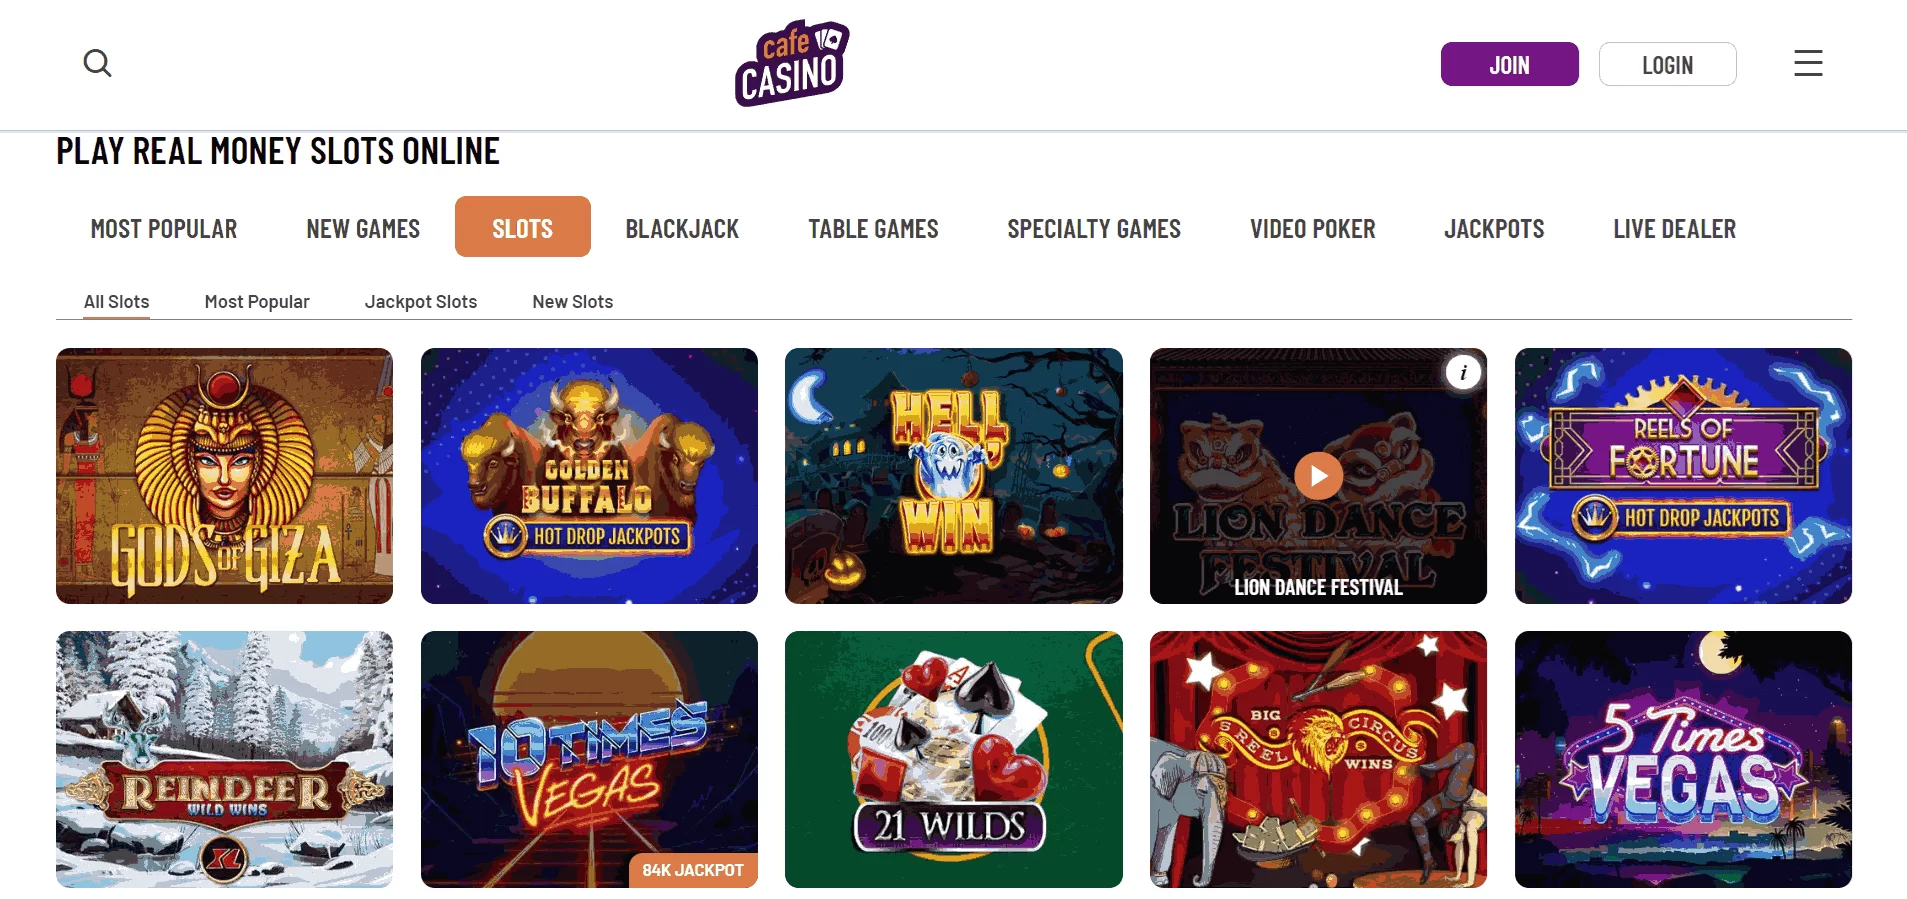 Cafe Casino Weekly Promotions Screen 1